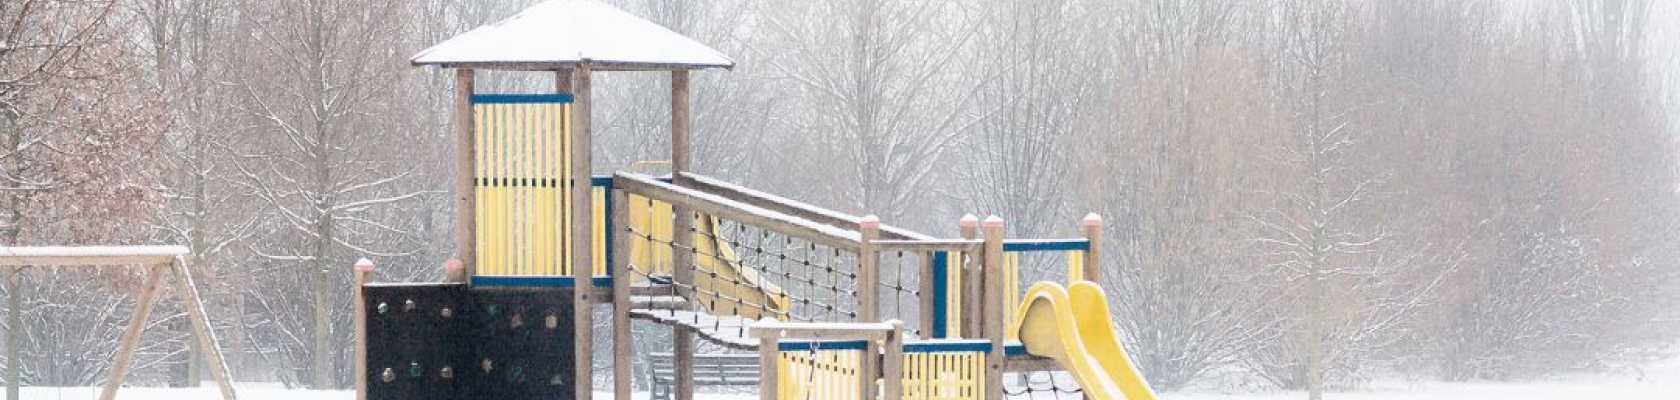 Image of a playground in winter